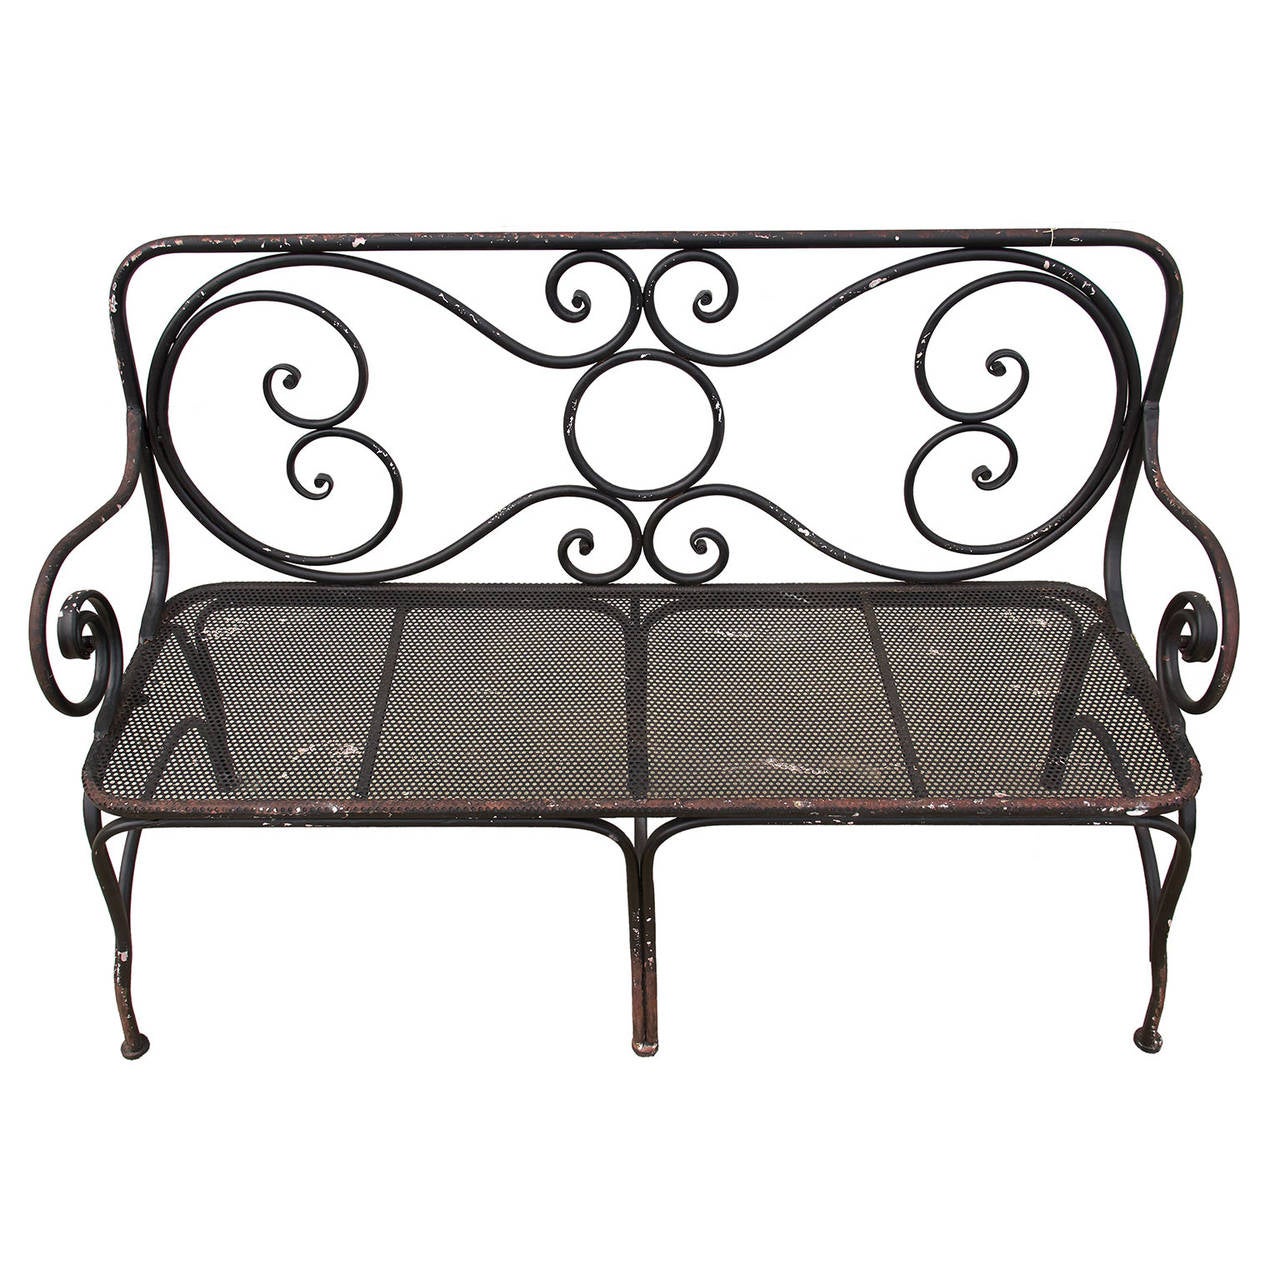 An early 20th century french metal garden bench.